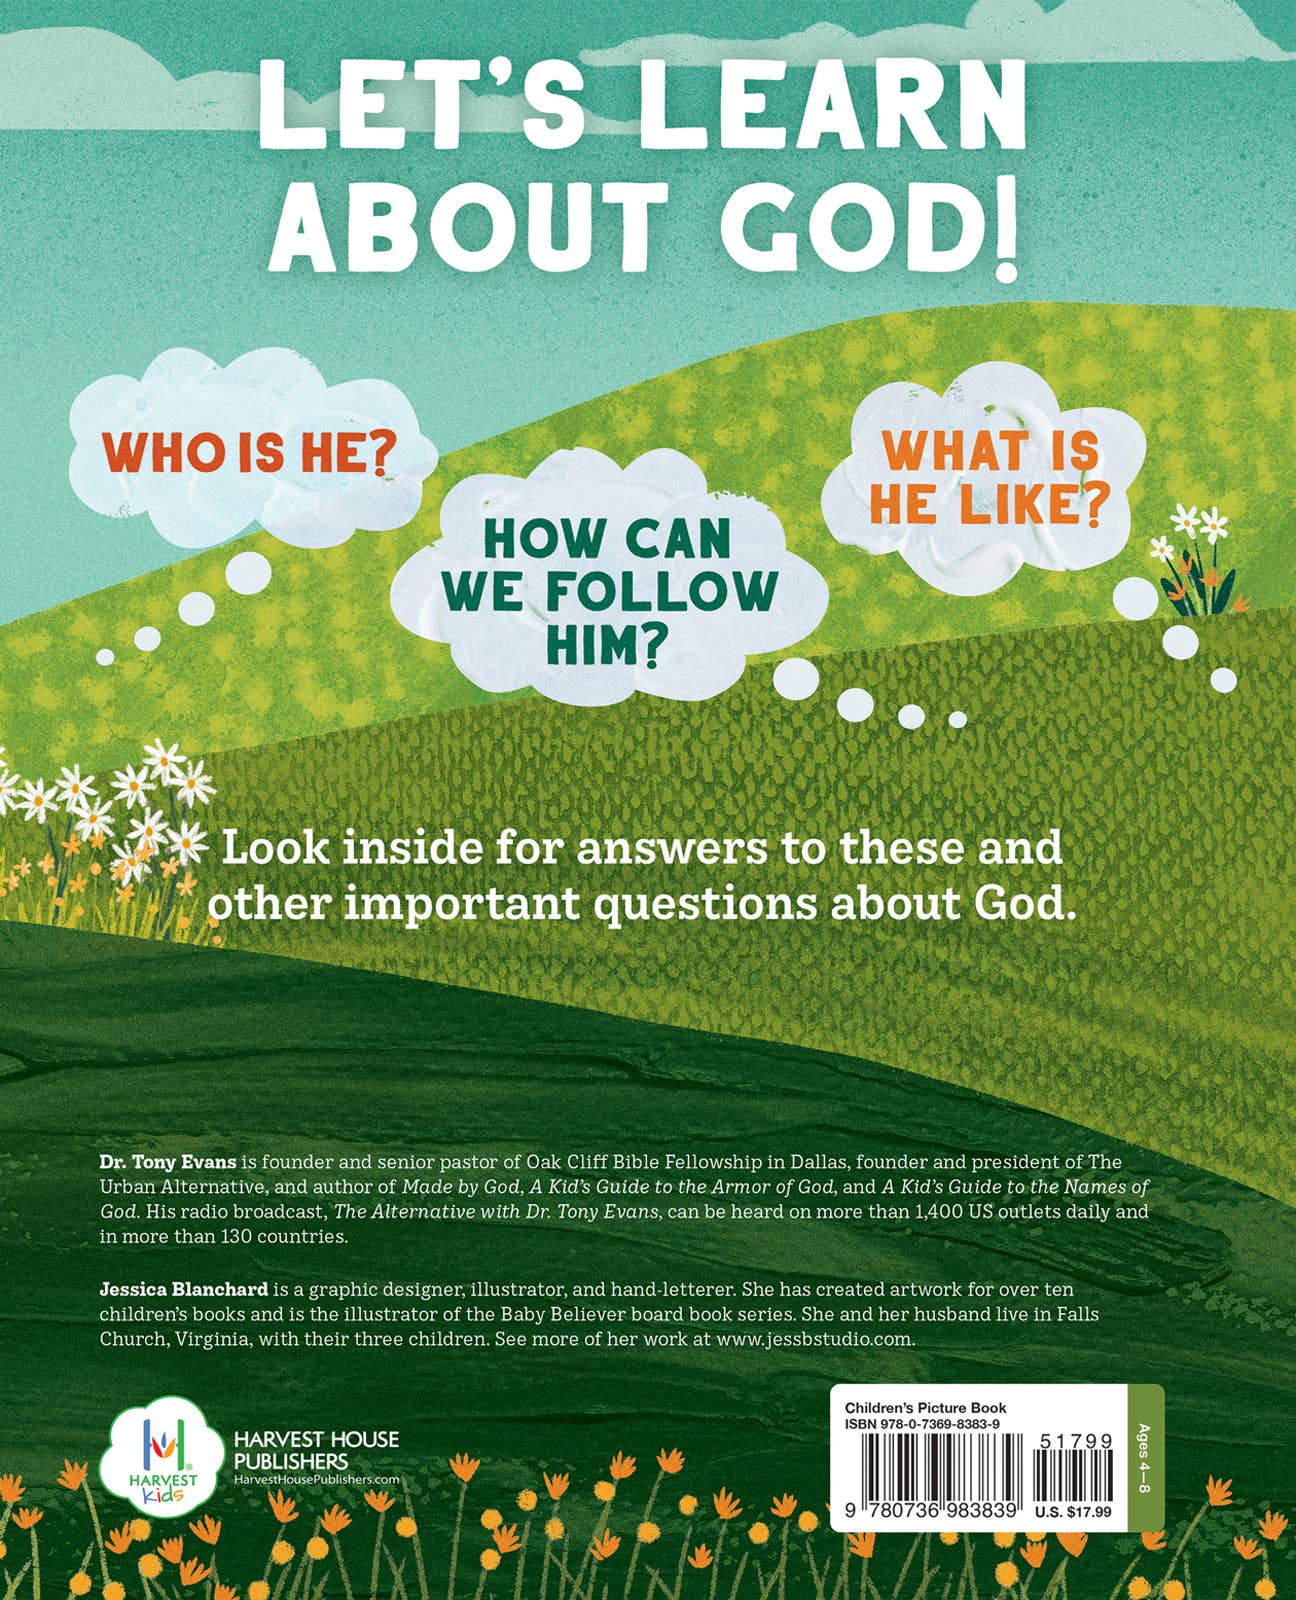 My Biggest Questions About God - Book Kids